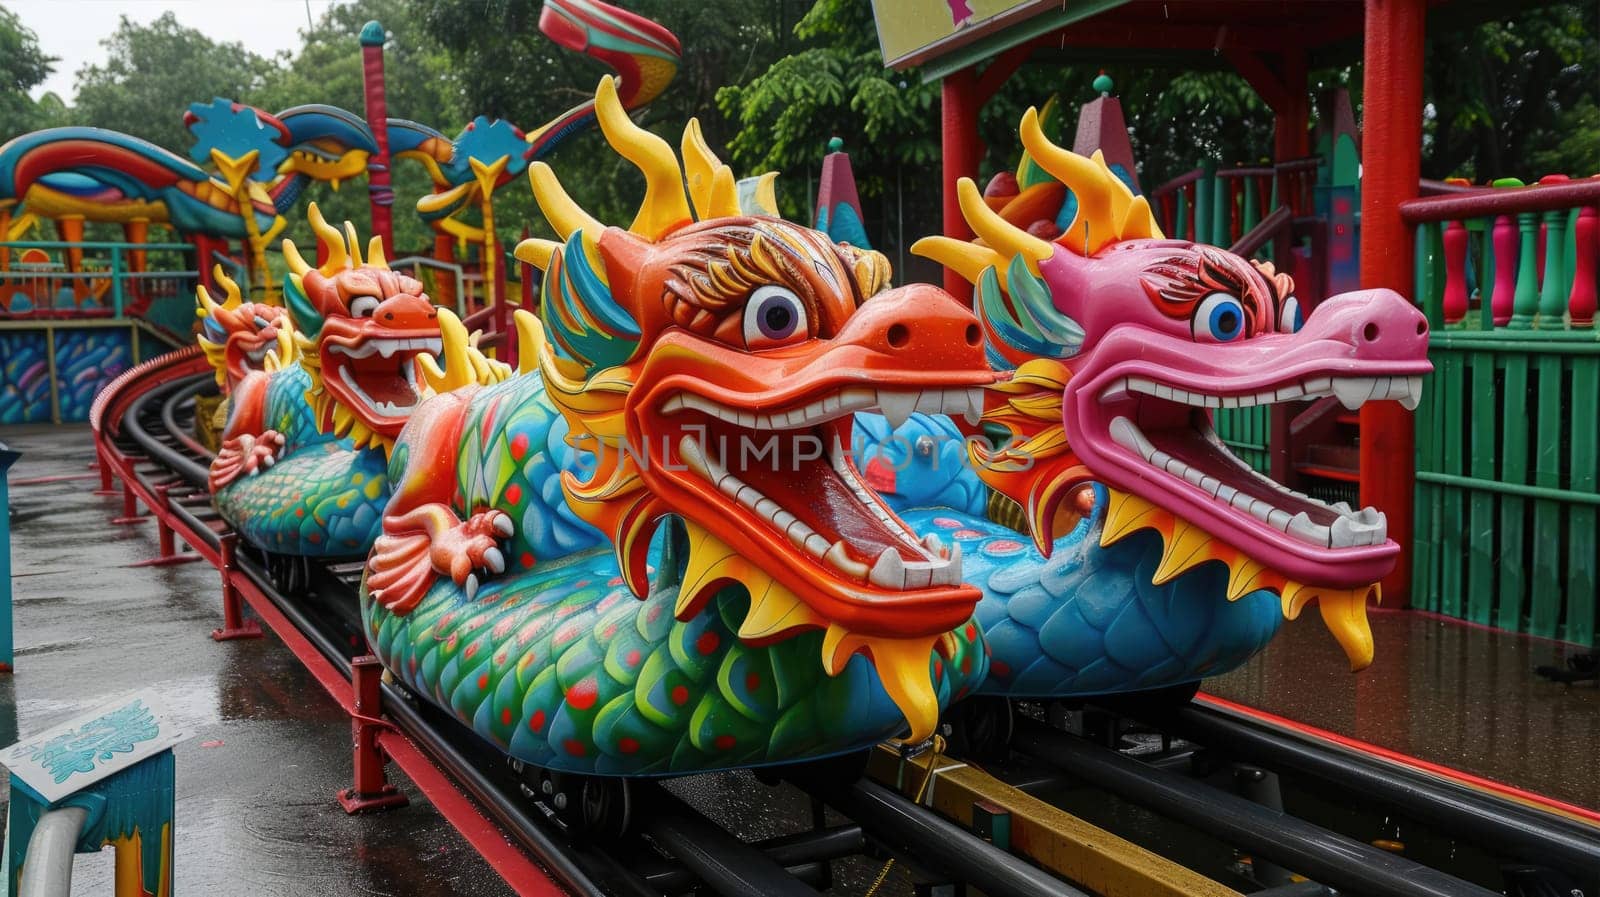 Play areas roller coasters with dragons by natali_brill